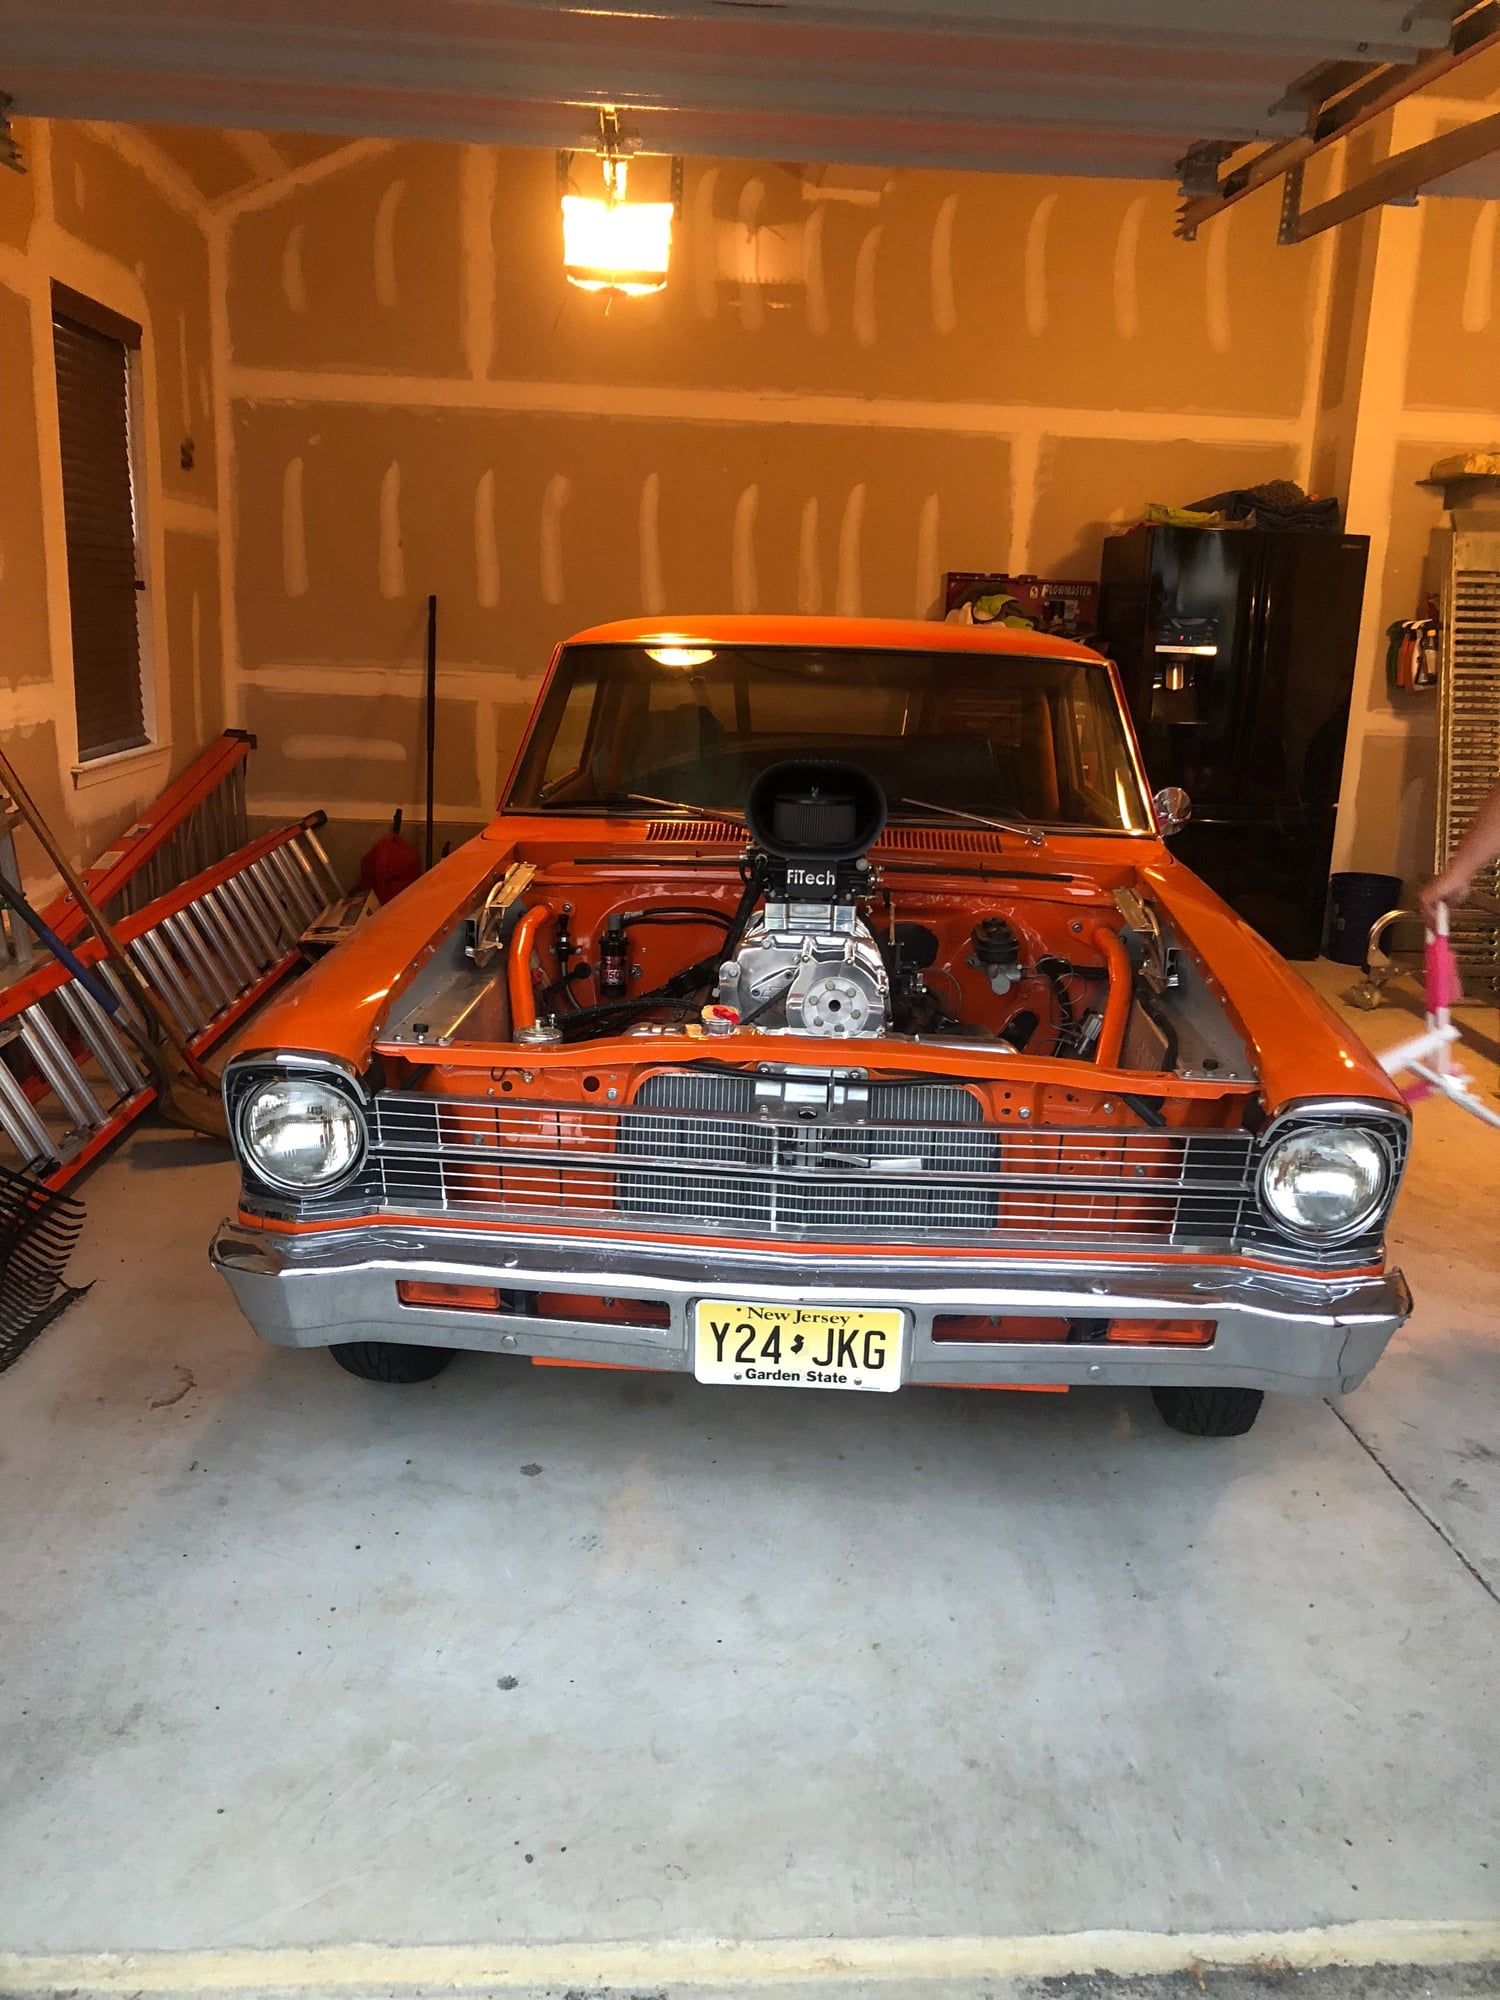 1967 Chevrolet Chevy II - Trade: 67 Nova Pro street, everything new, chassis works/ fitech/ blown - Used - VIN 8888888888888 - 400 Miles - 8 cyl - 2WD - Automatic - Jersey Shore, NJ 08734, United States